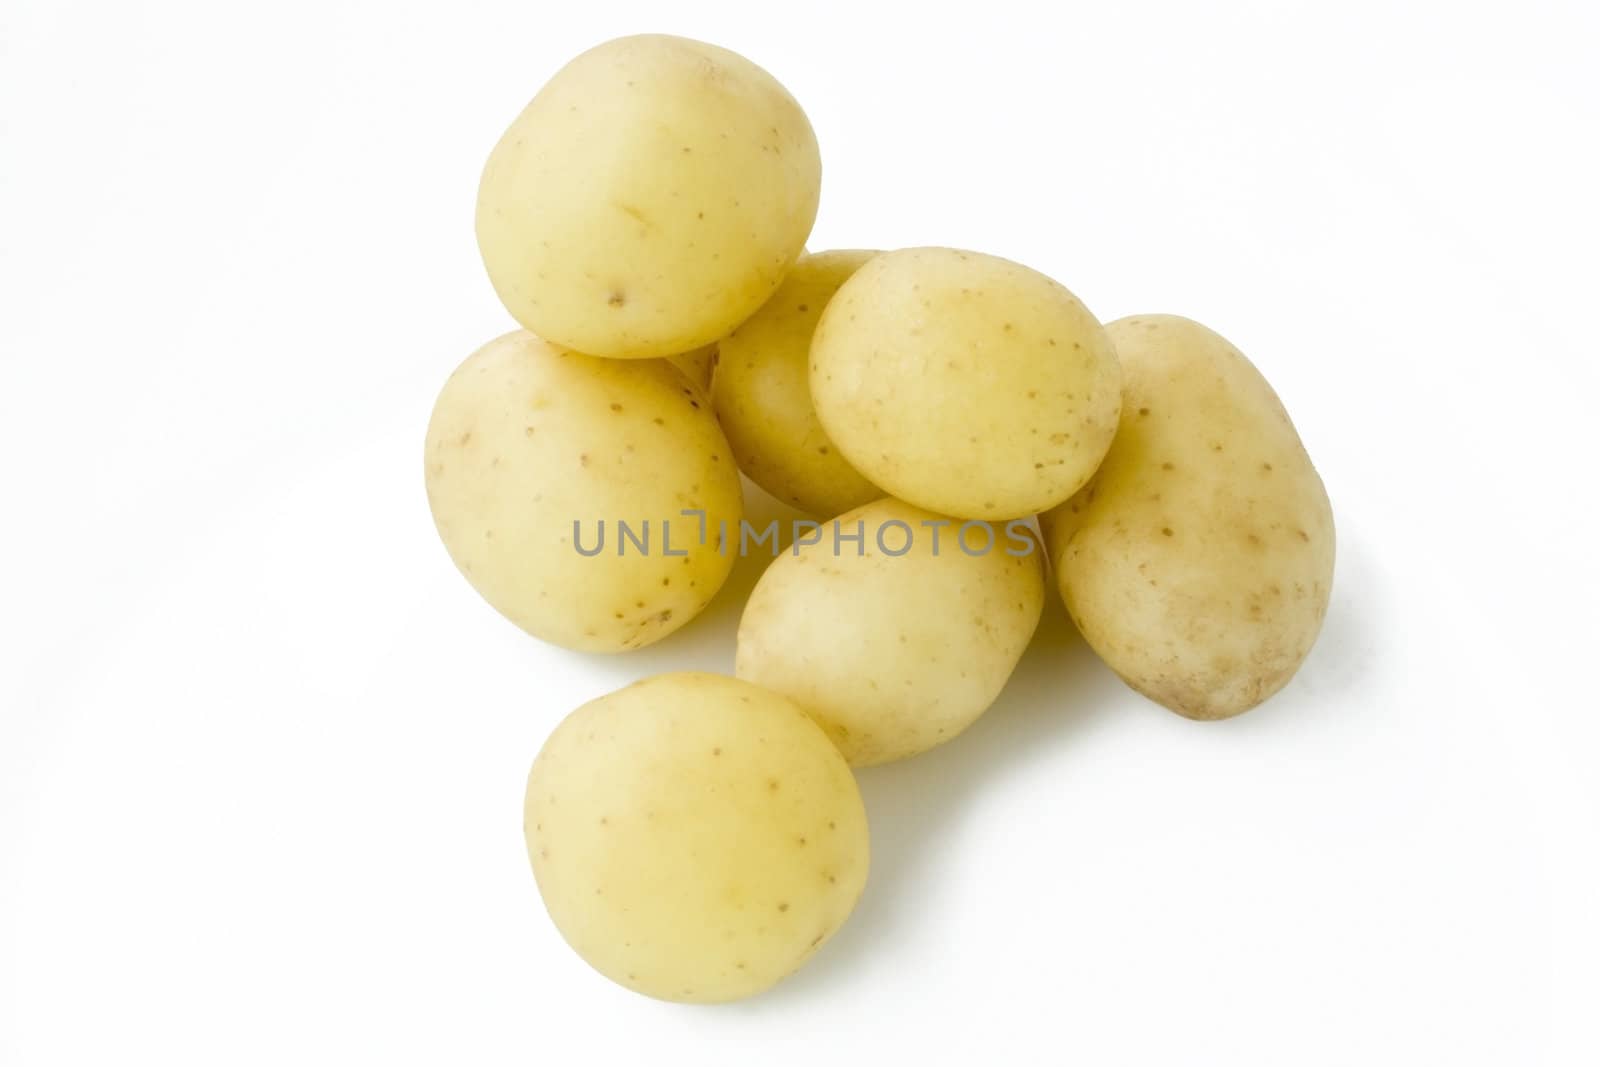 Young potatoes isolated on white background